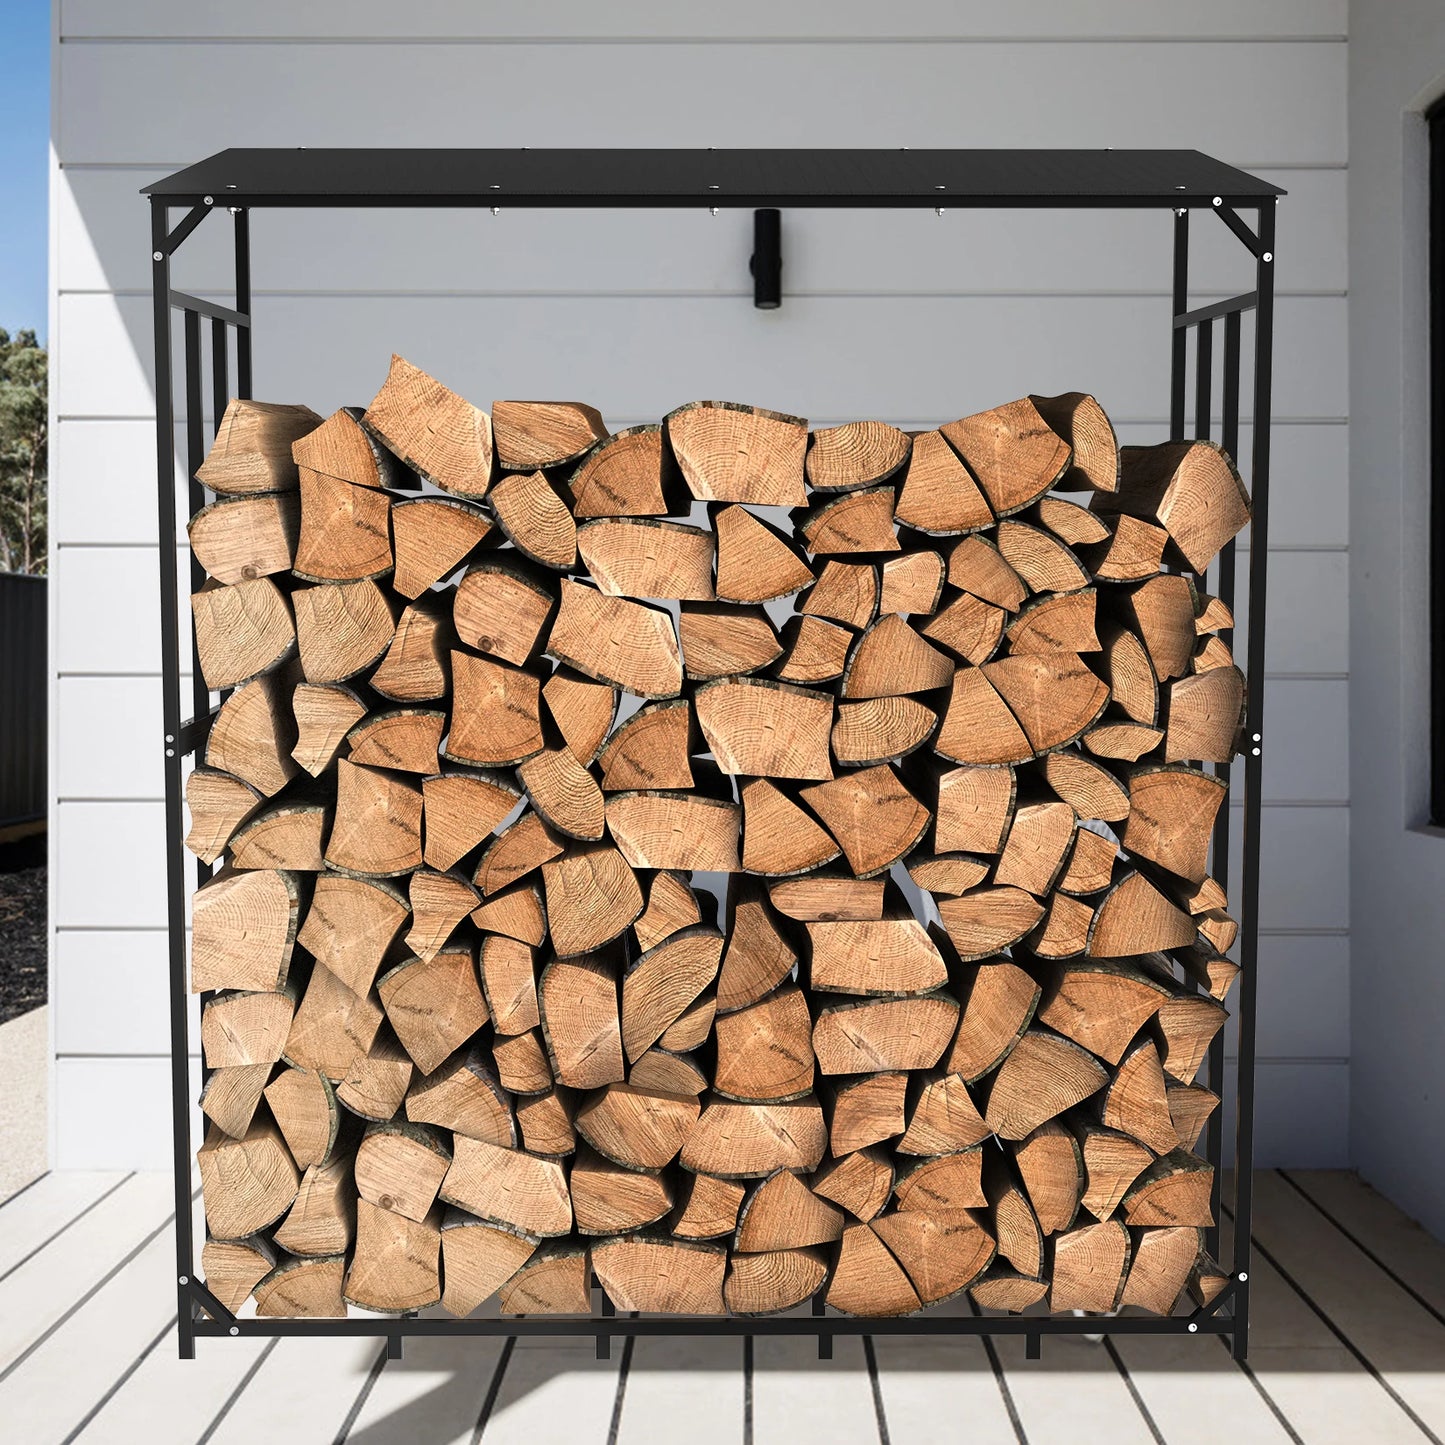 Heavy Duty Tall Metal Firewood Rack Stand with Top Cover Fireplace Wood Storage Stacking Holder